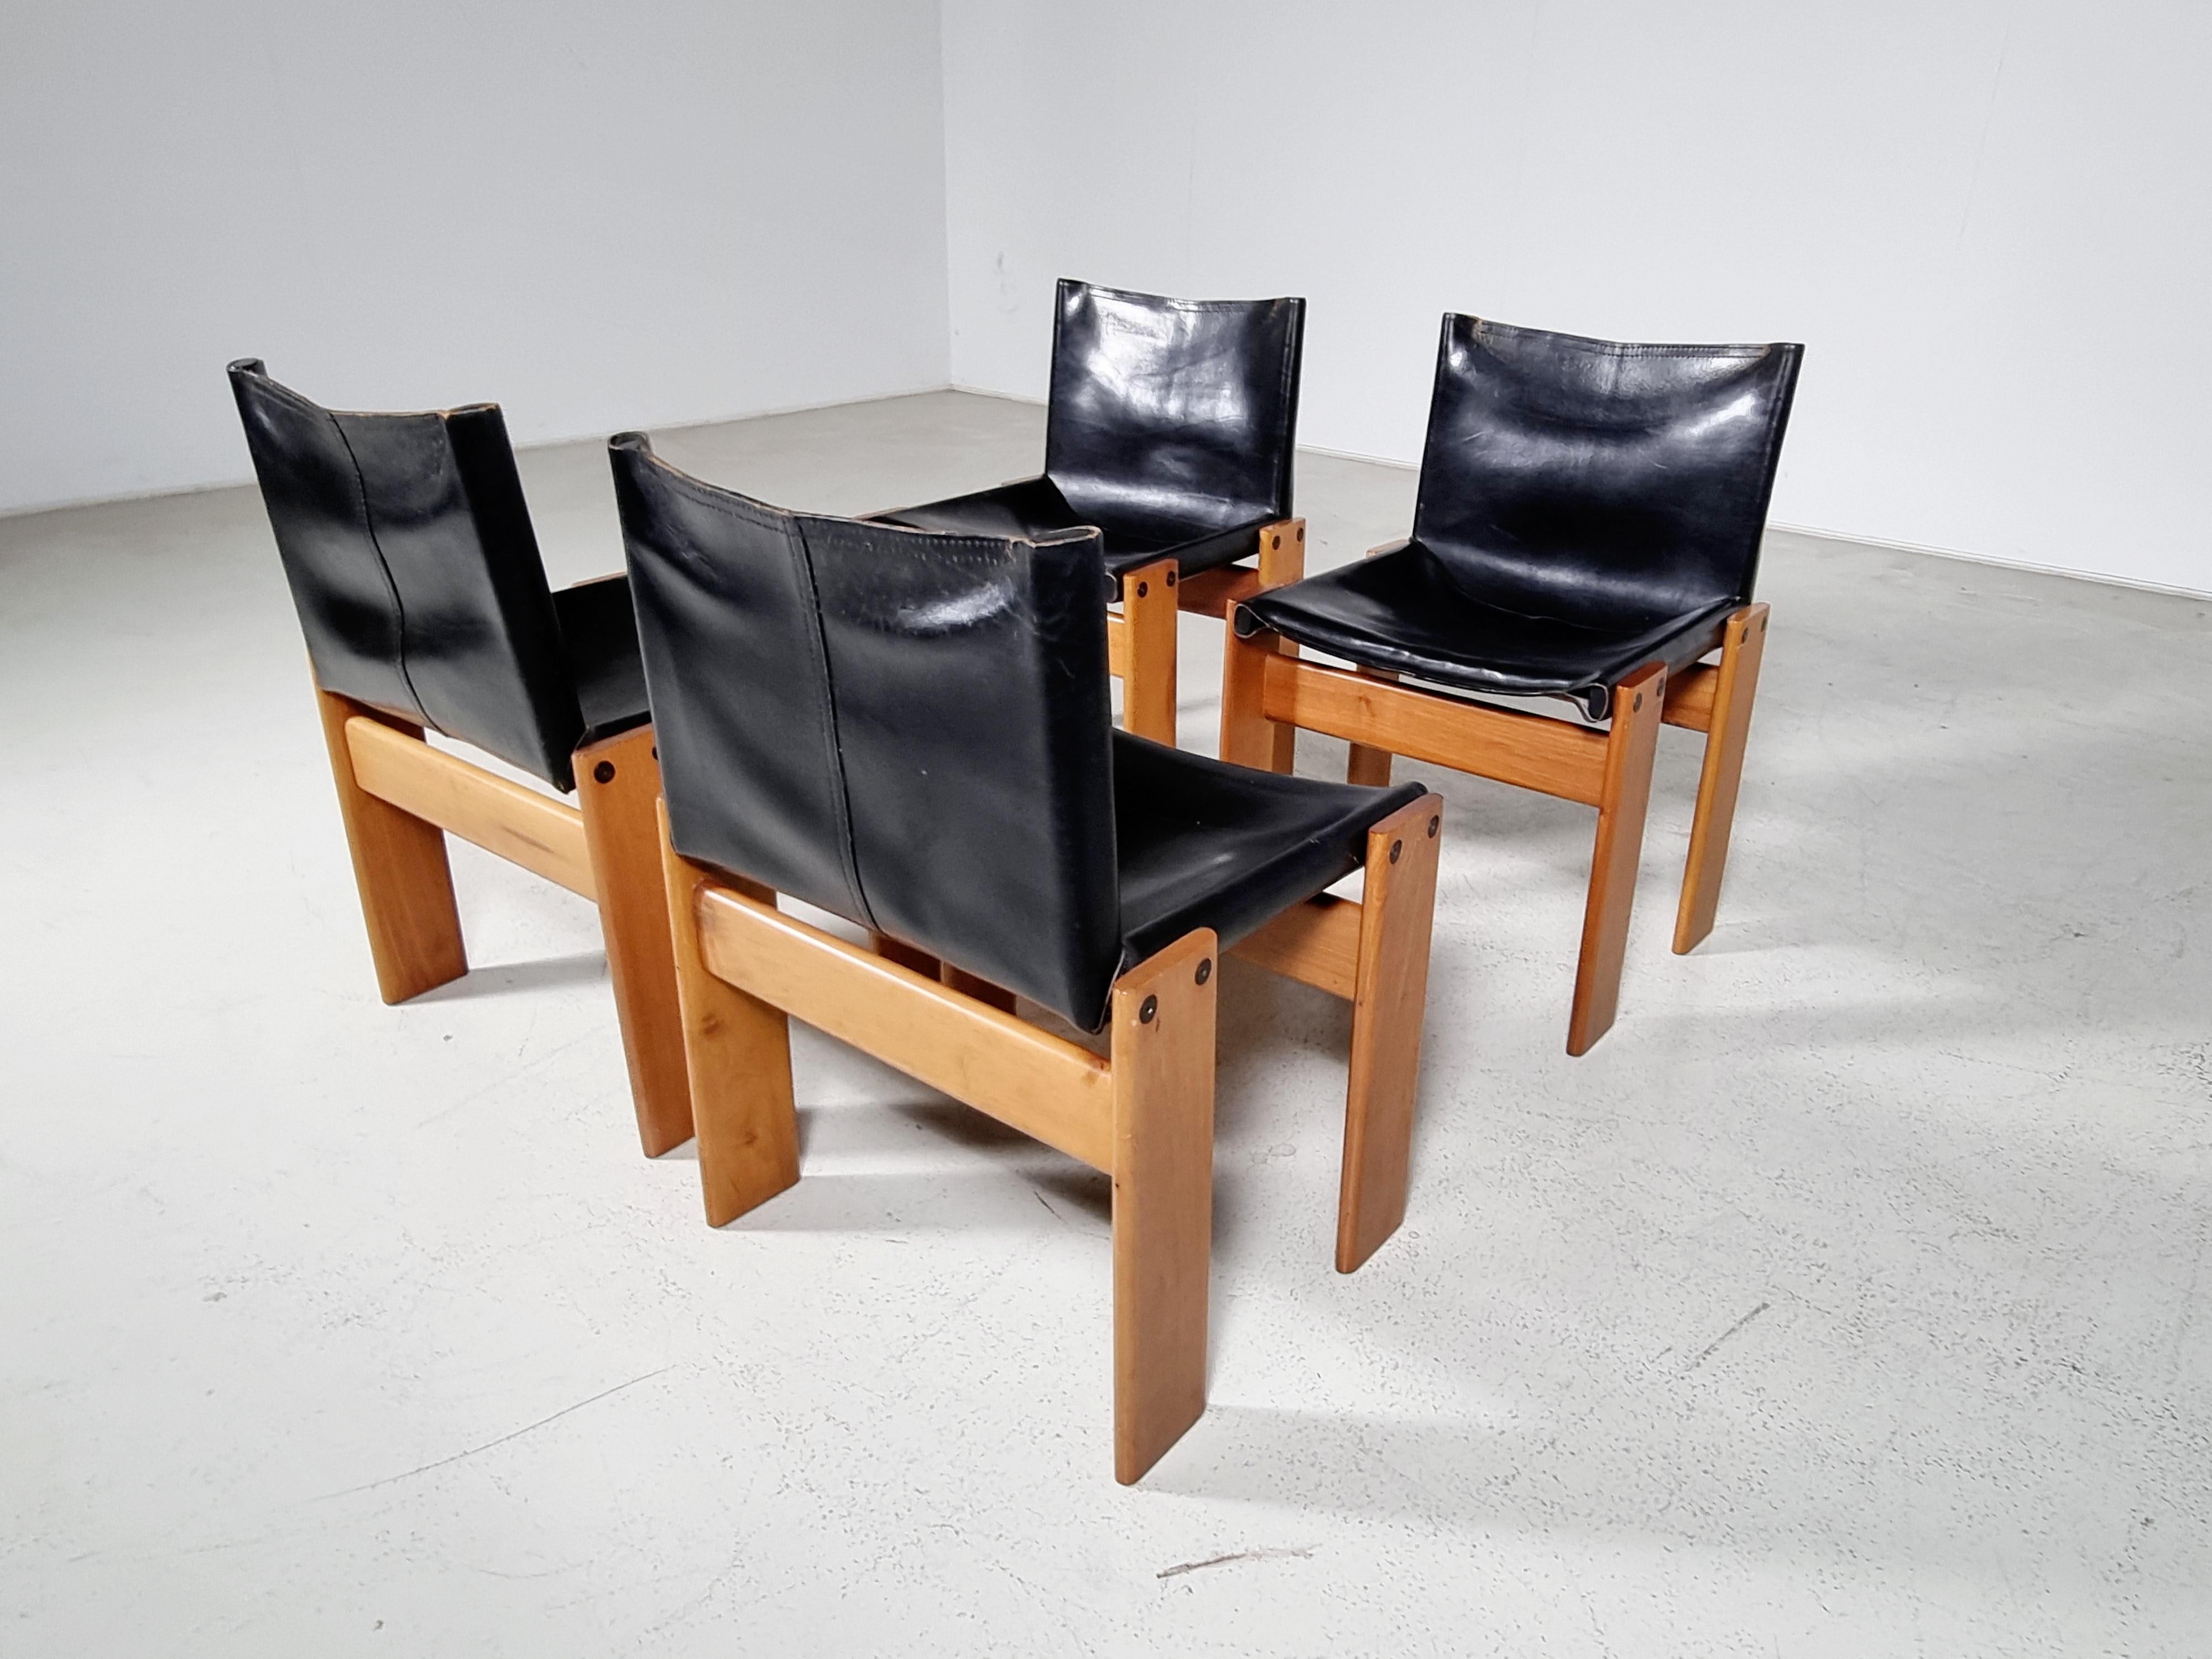 Afra & Tobia Scarpa Set of 4 'Monk' Dining Chairs in Black Leather, 1970s 2